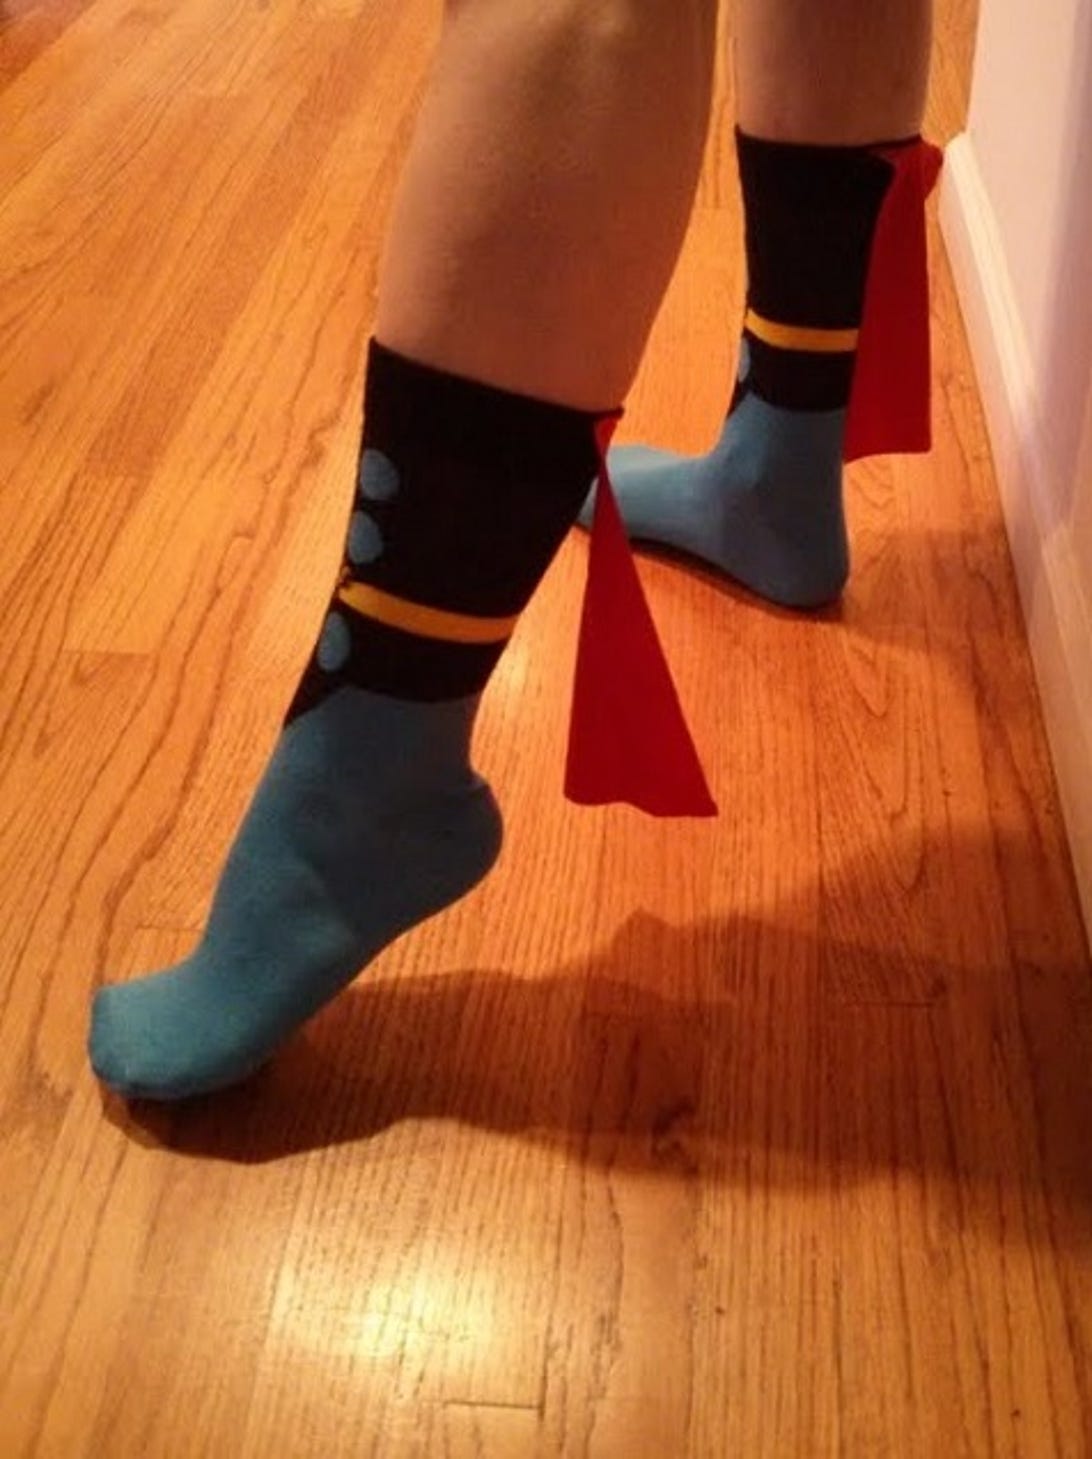 Thor socks...with capes!